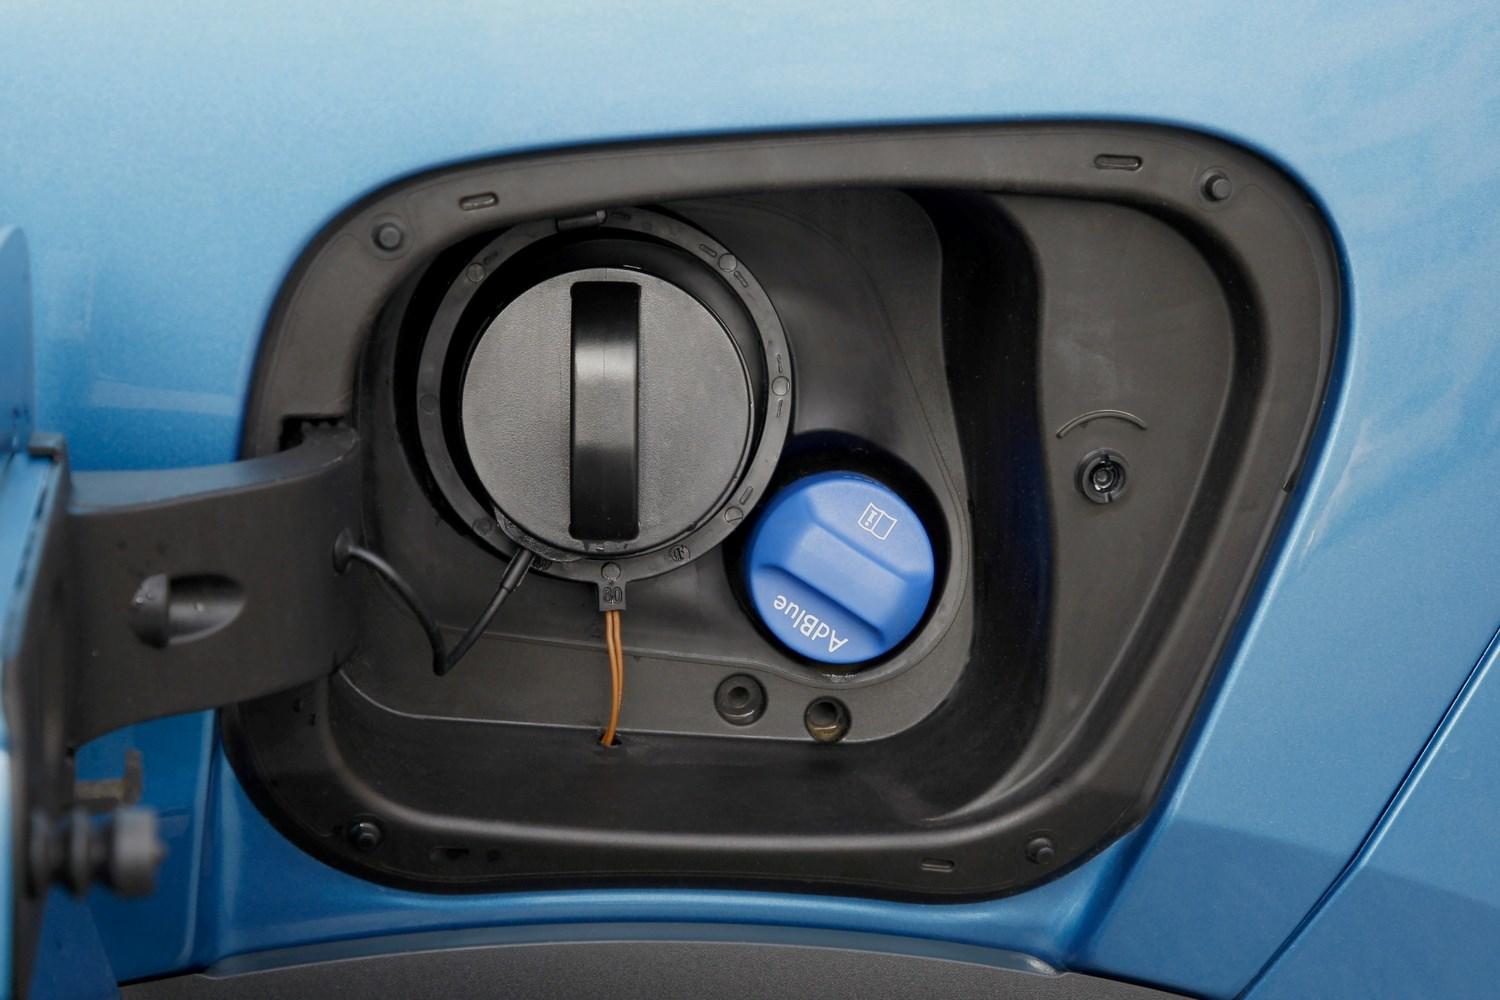 Close-up of diesel fuel and AdBlue fluid caps, available for top-up at Agnew Van Centre, Mallusk.